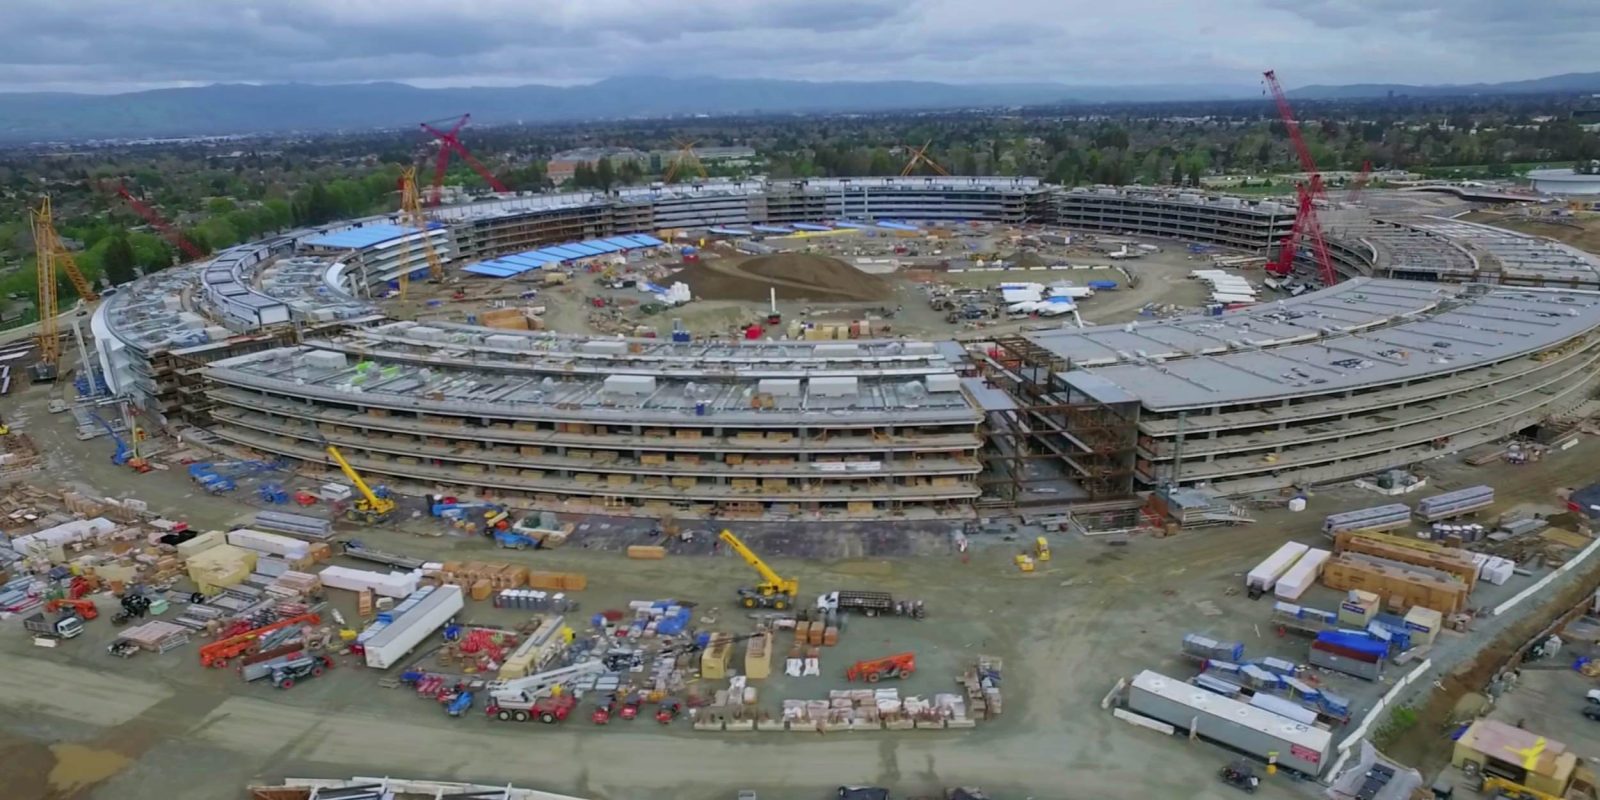 Short interview with Matthew Roberts who's been documenting the construction of Apple Park with his drone